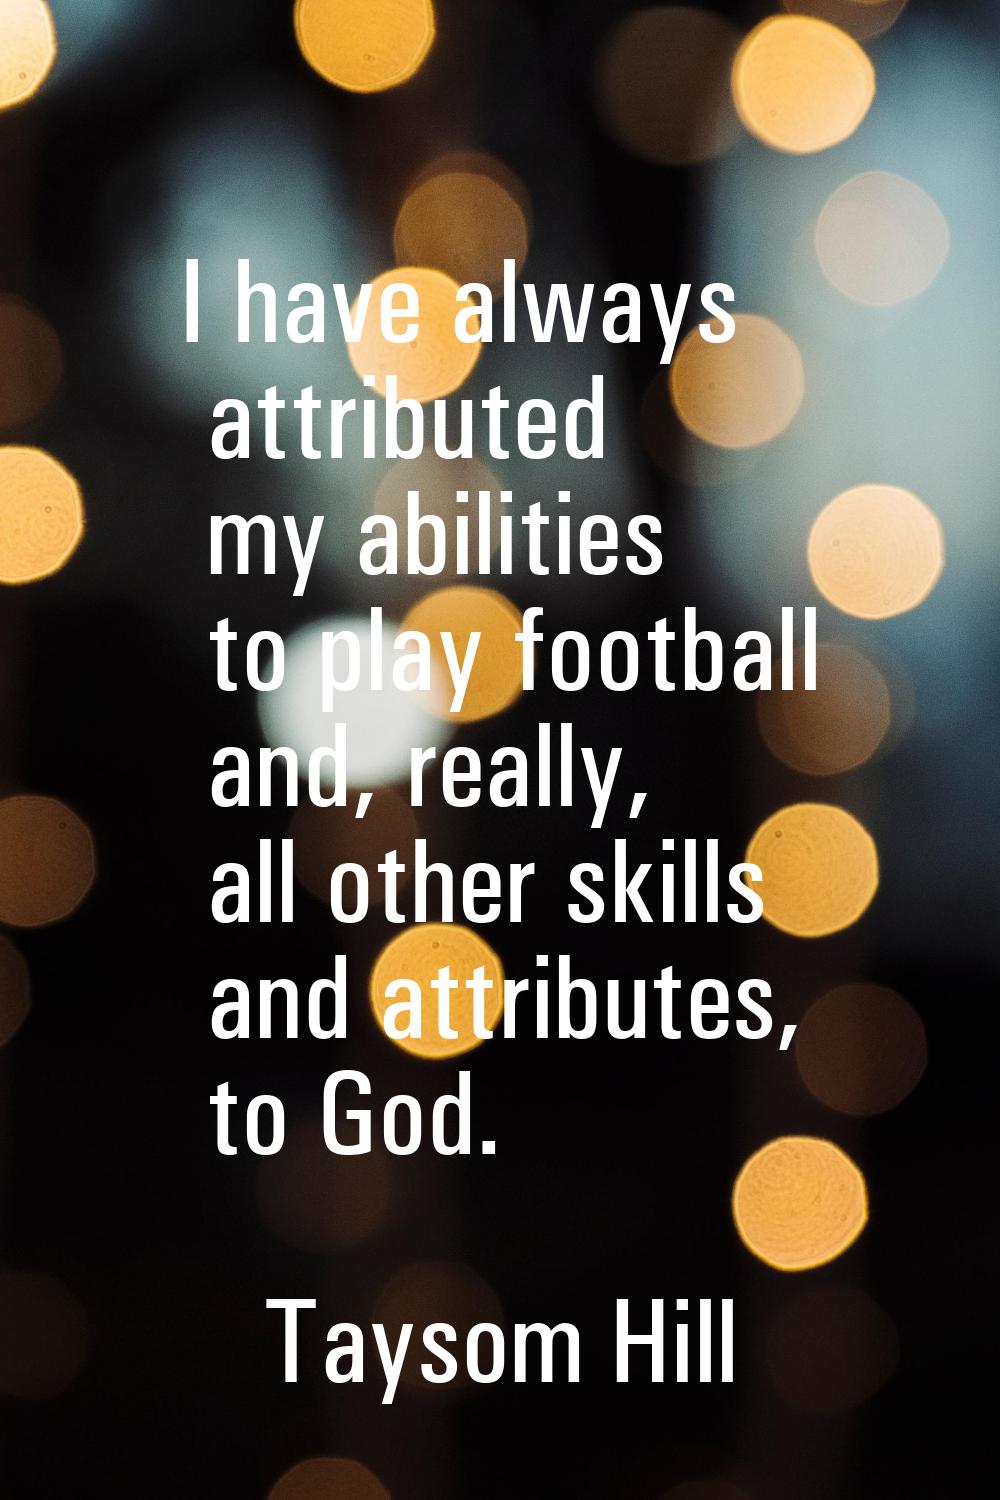 I have always attributed my abilities to play football and, really, all other skills and attributes